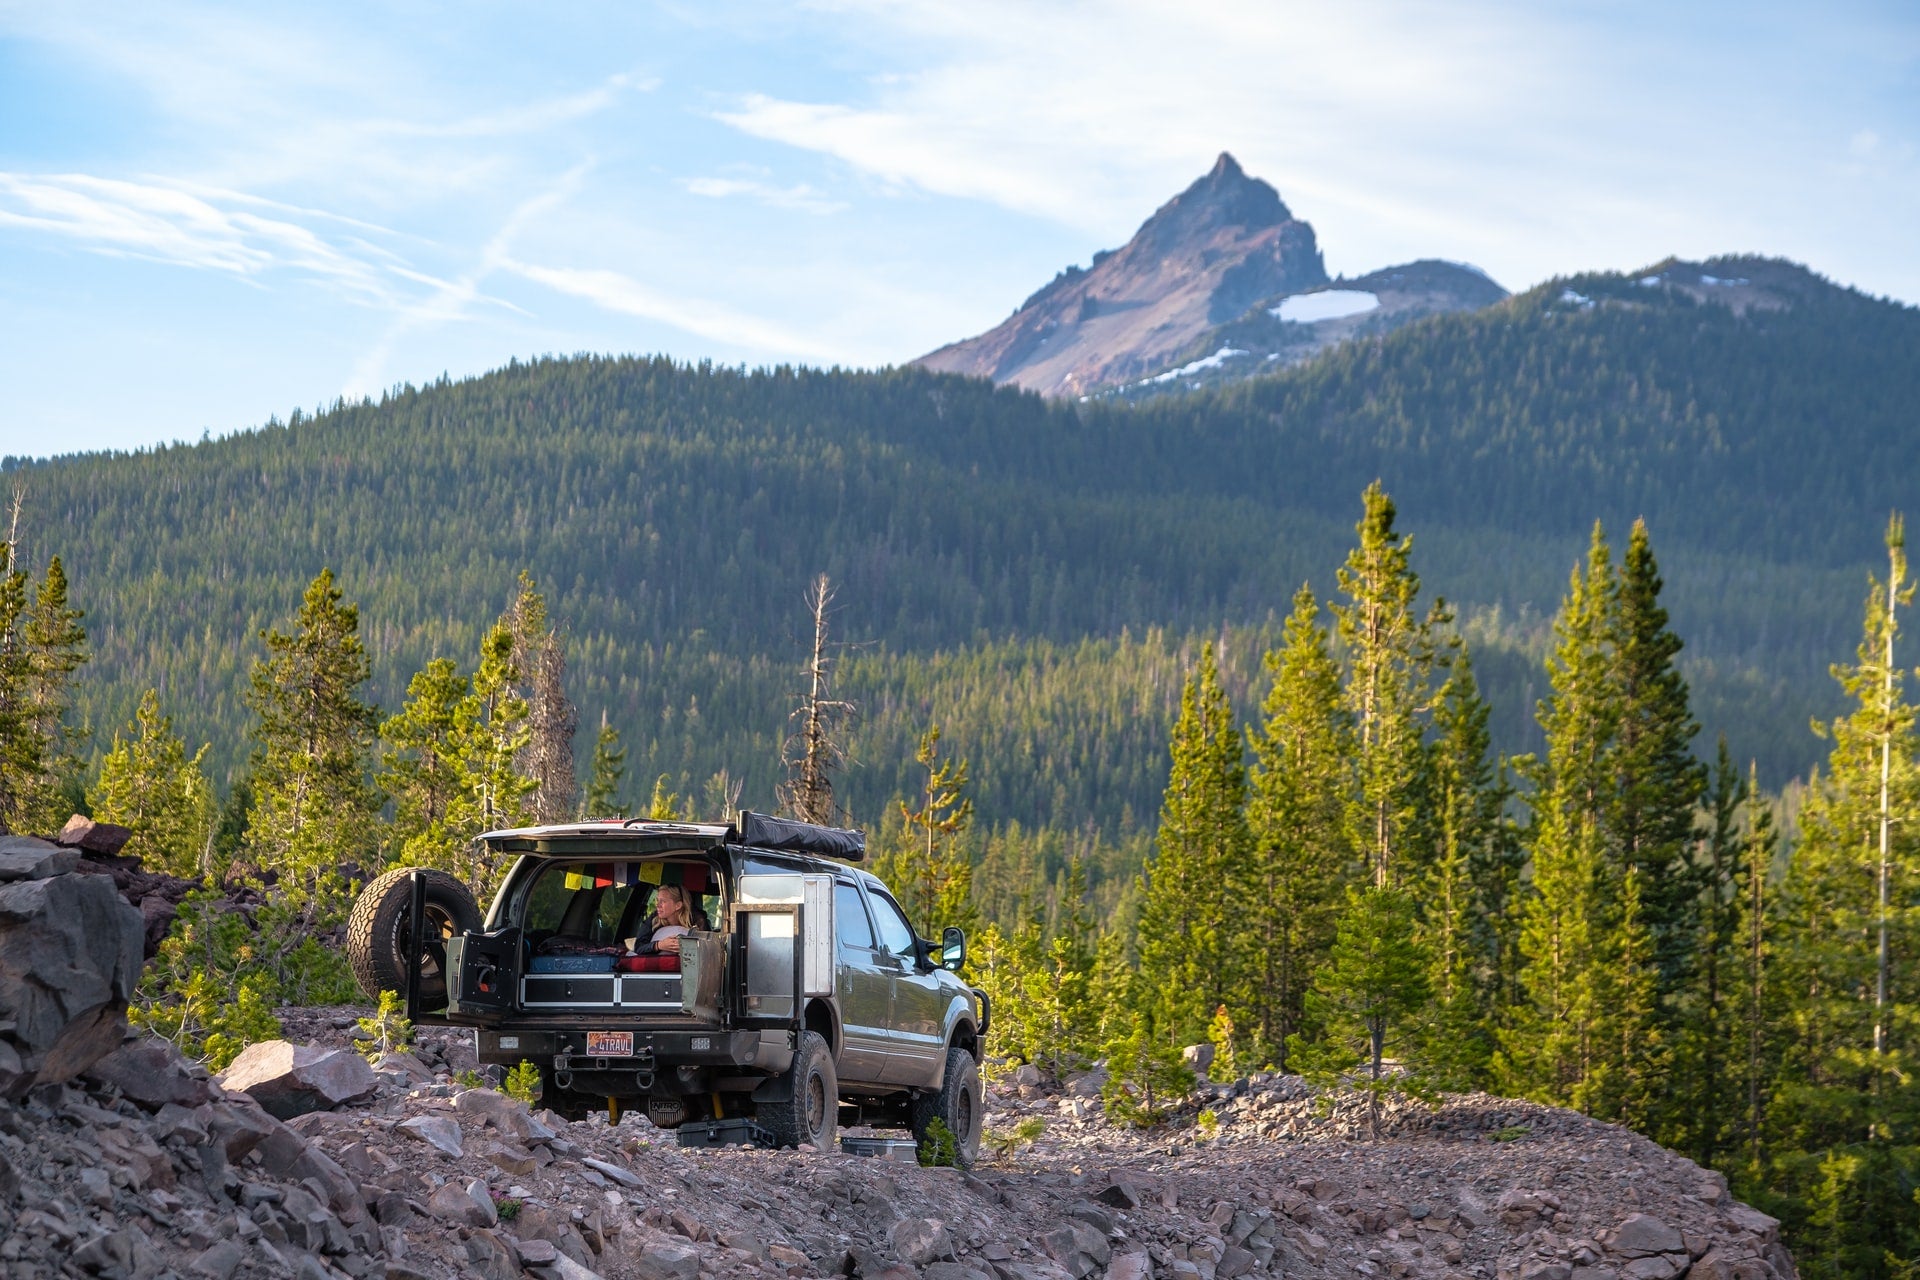 Image of a 4x4 vehicle parked in a camping area in a heavily wooded mountainous area